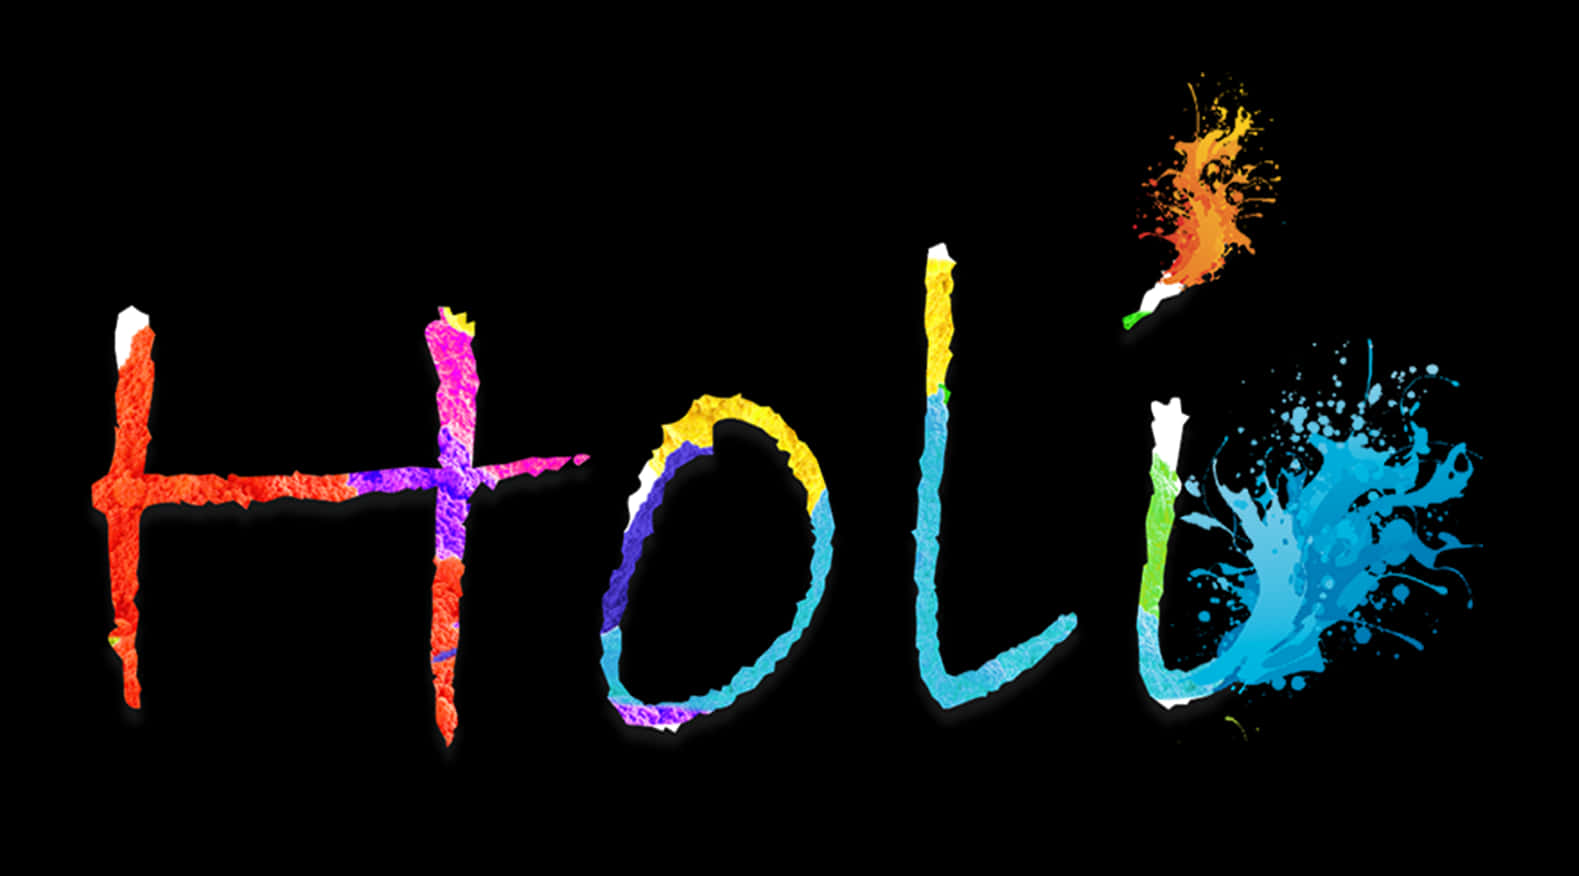 A Colorful Text With Black Background